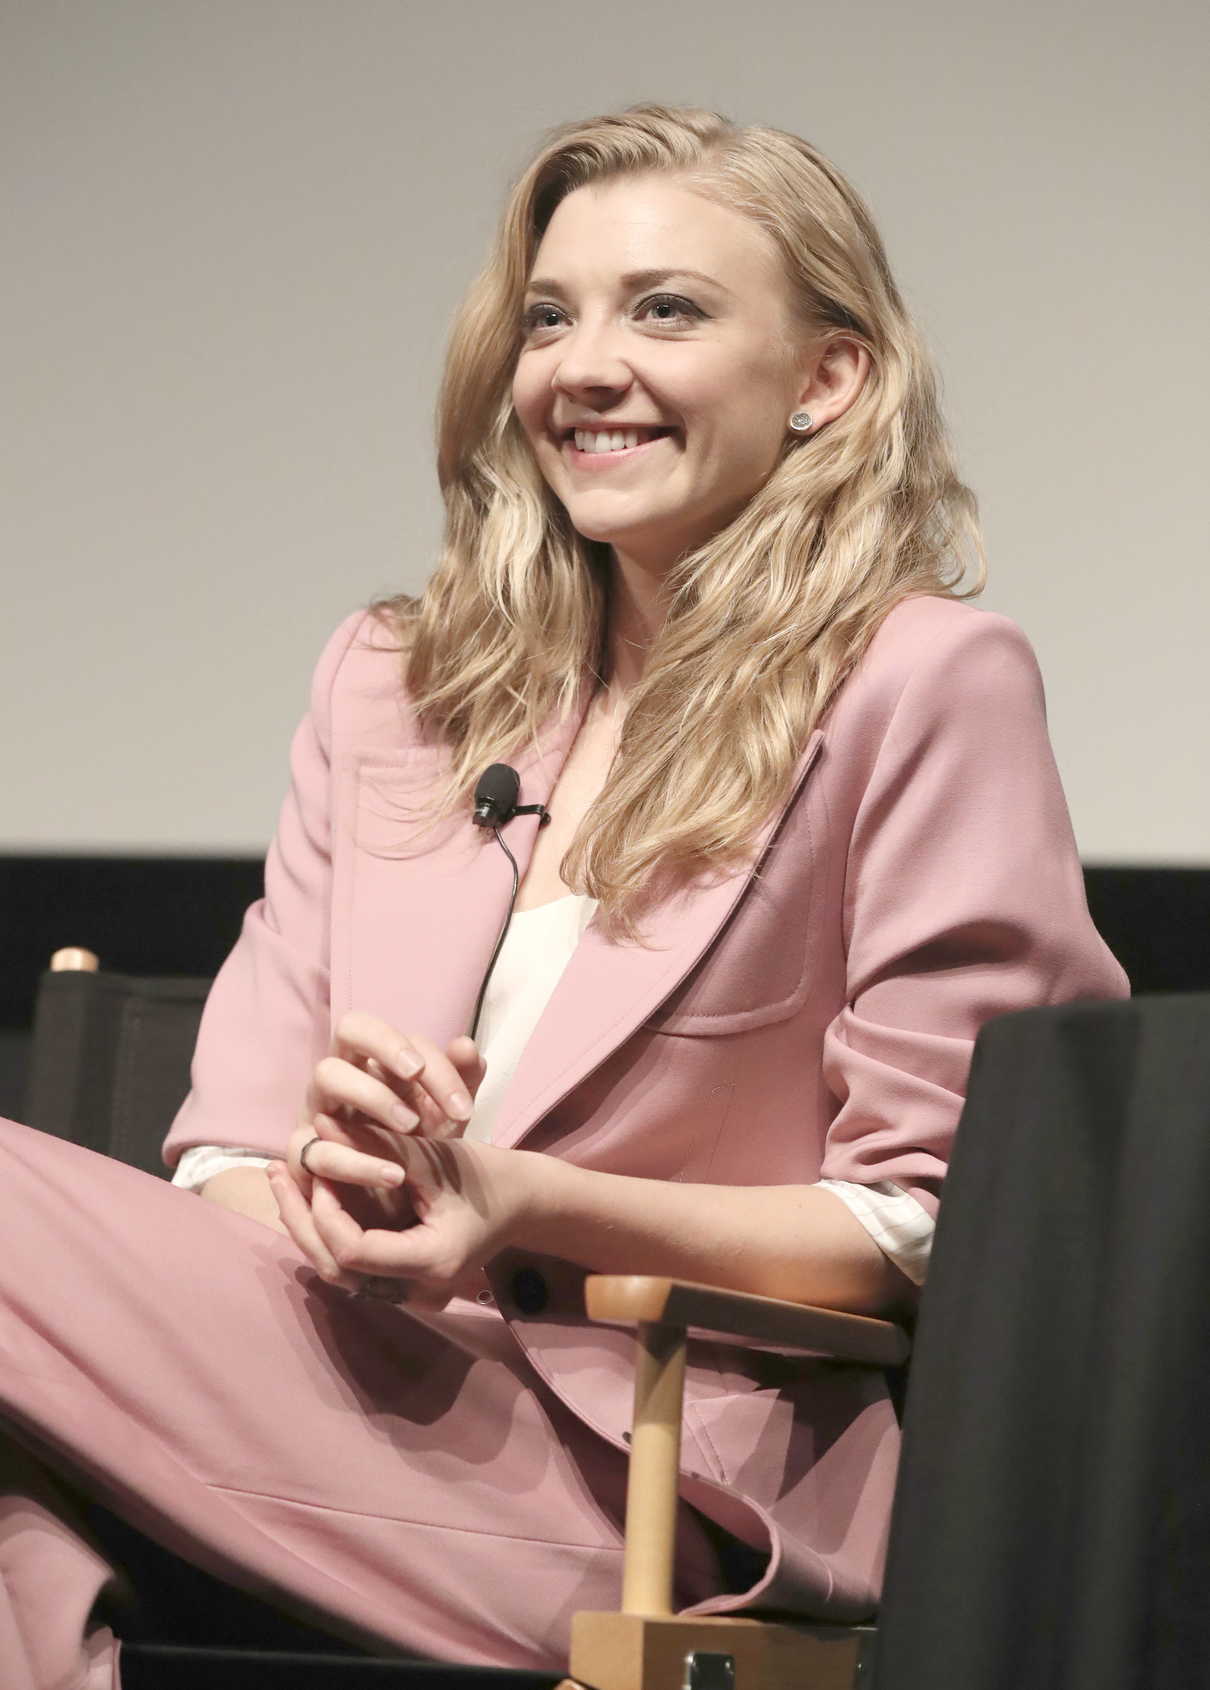 Natalie Dormer at the Picnic at Hanging Rock Premiere During the Tribeca Film Festival in New York City 04/28/2018-4